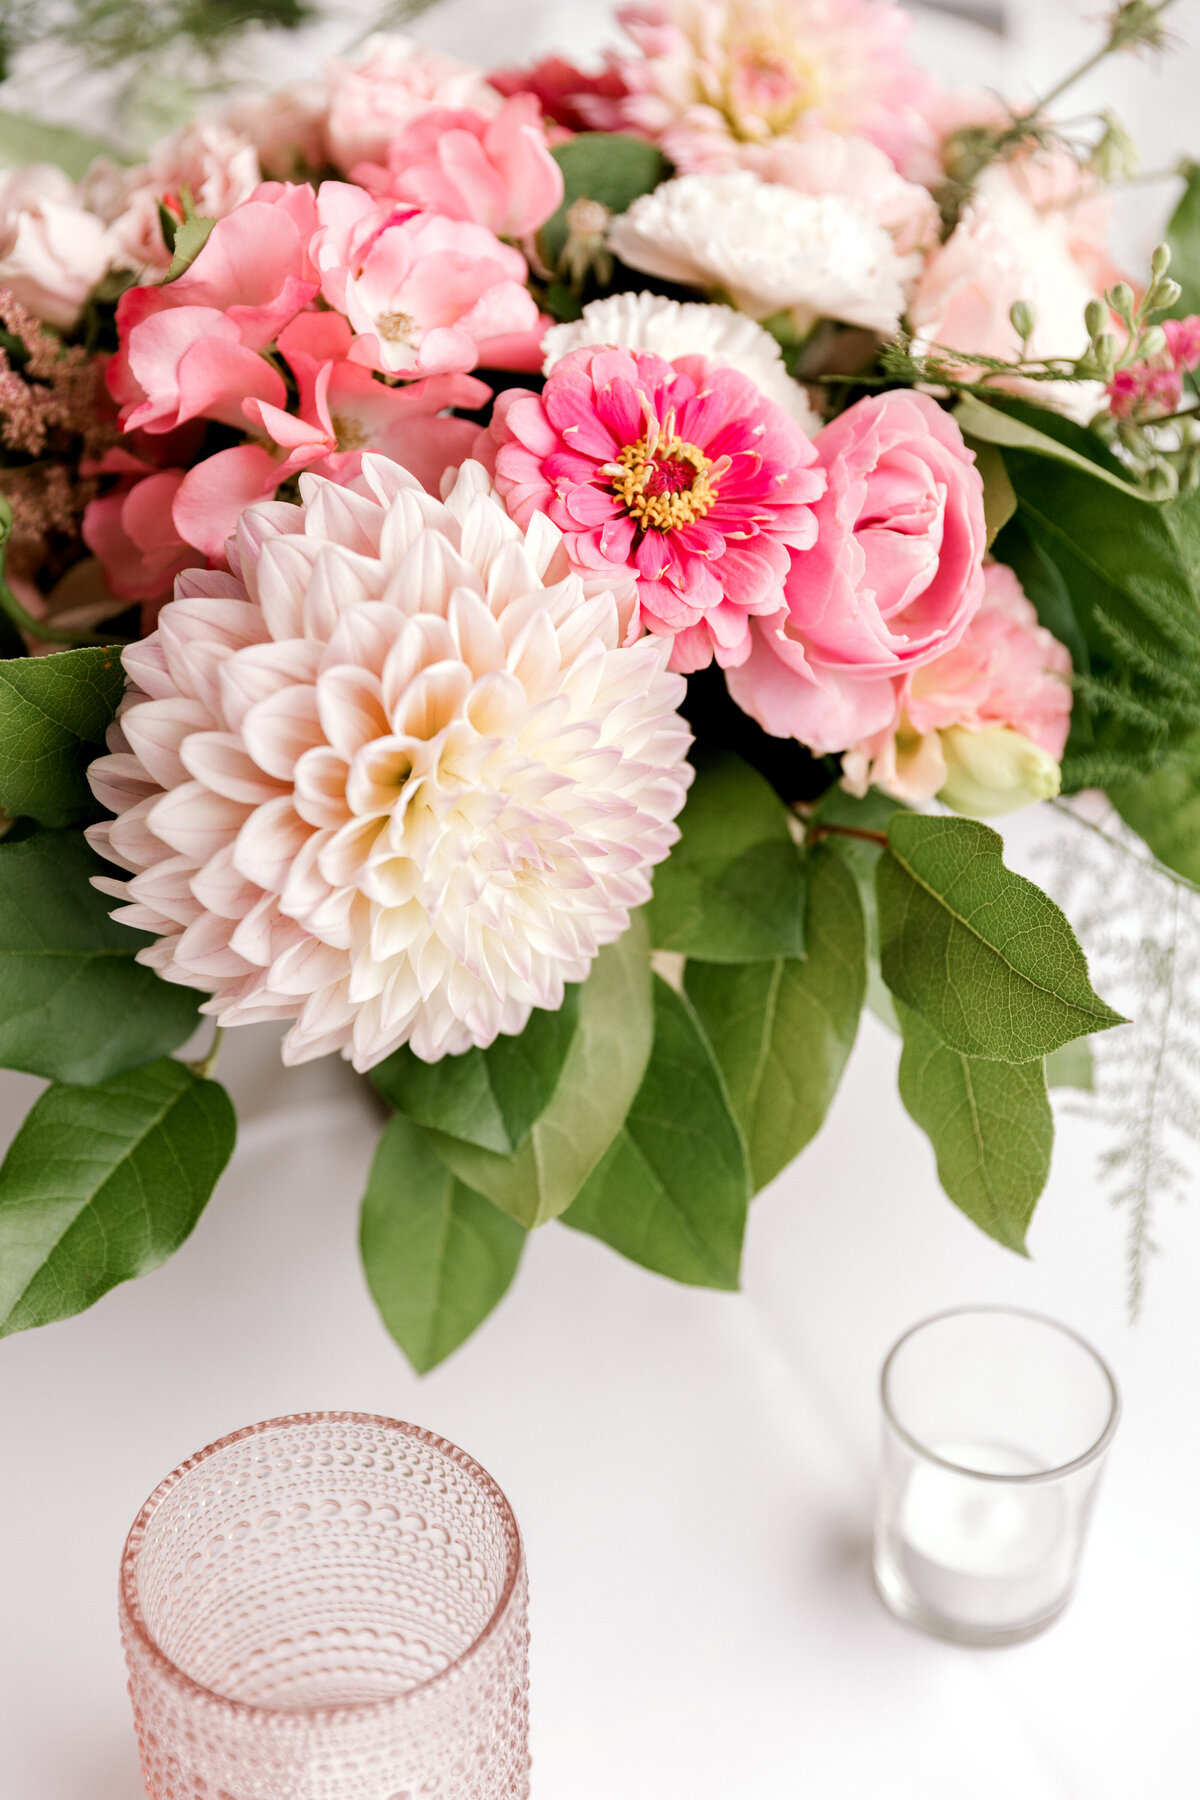 Wedding Centerpiece with a mix of pink florals